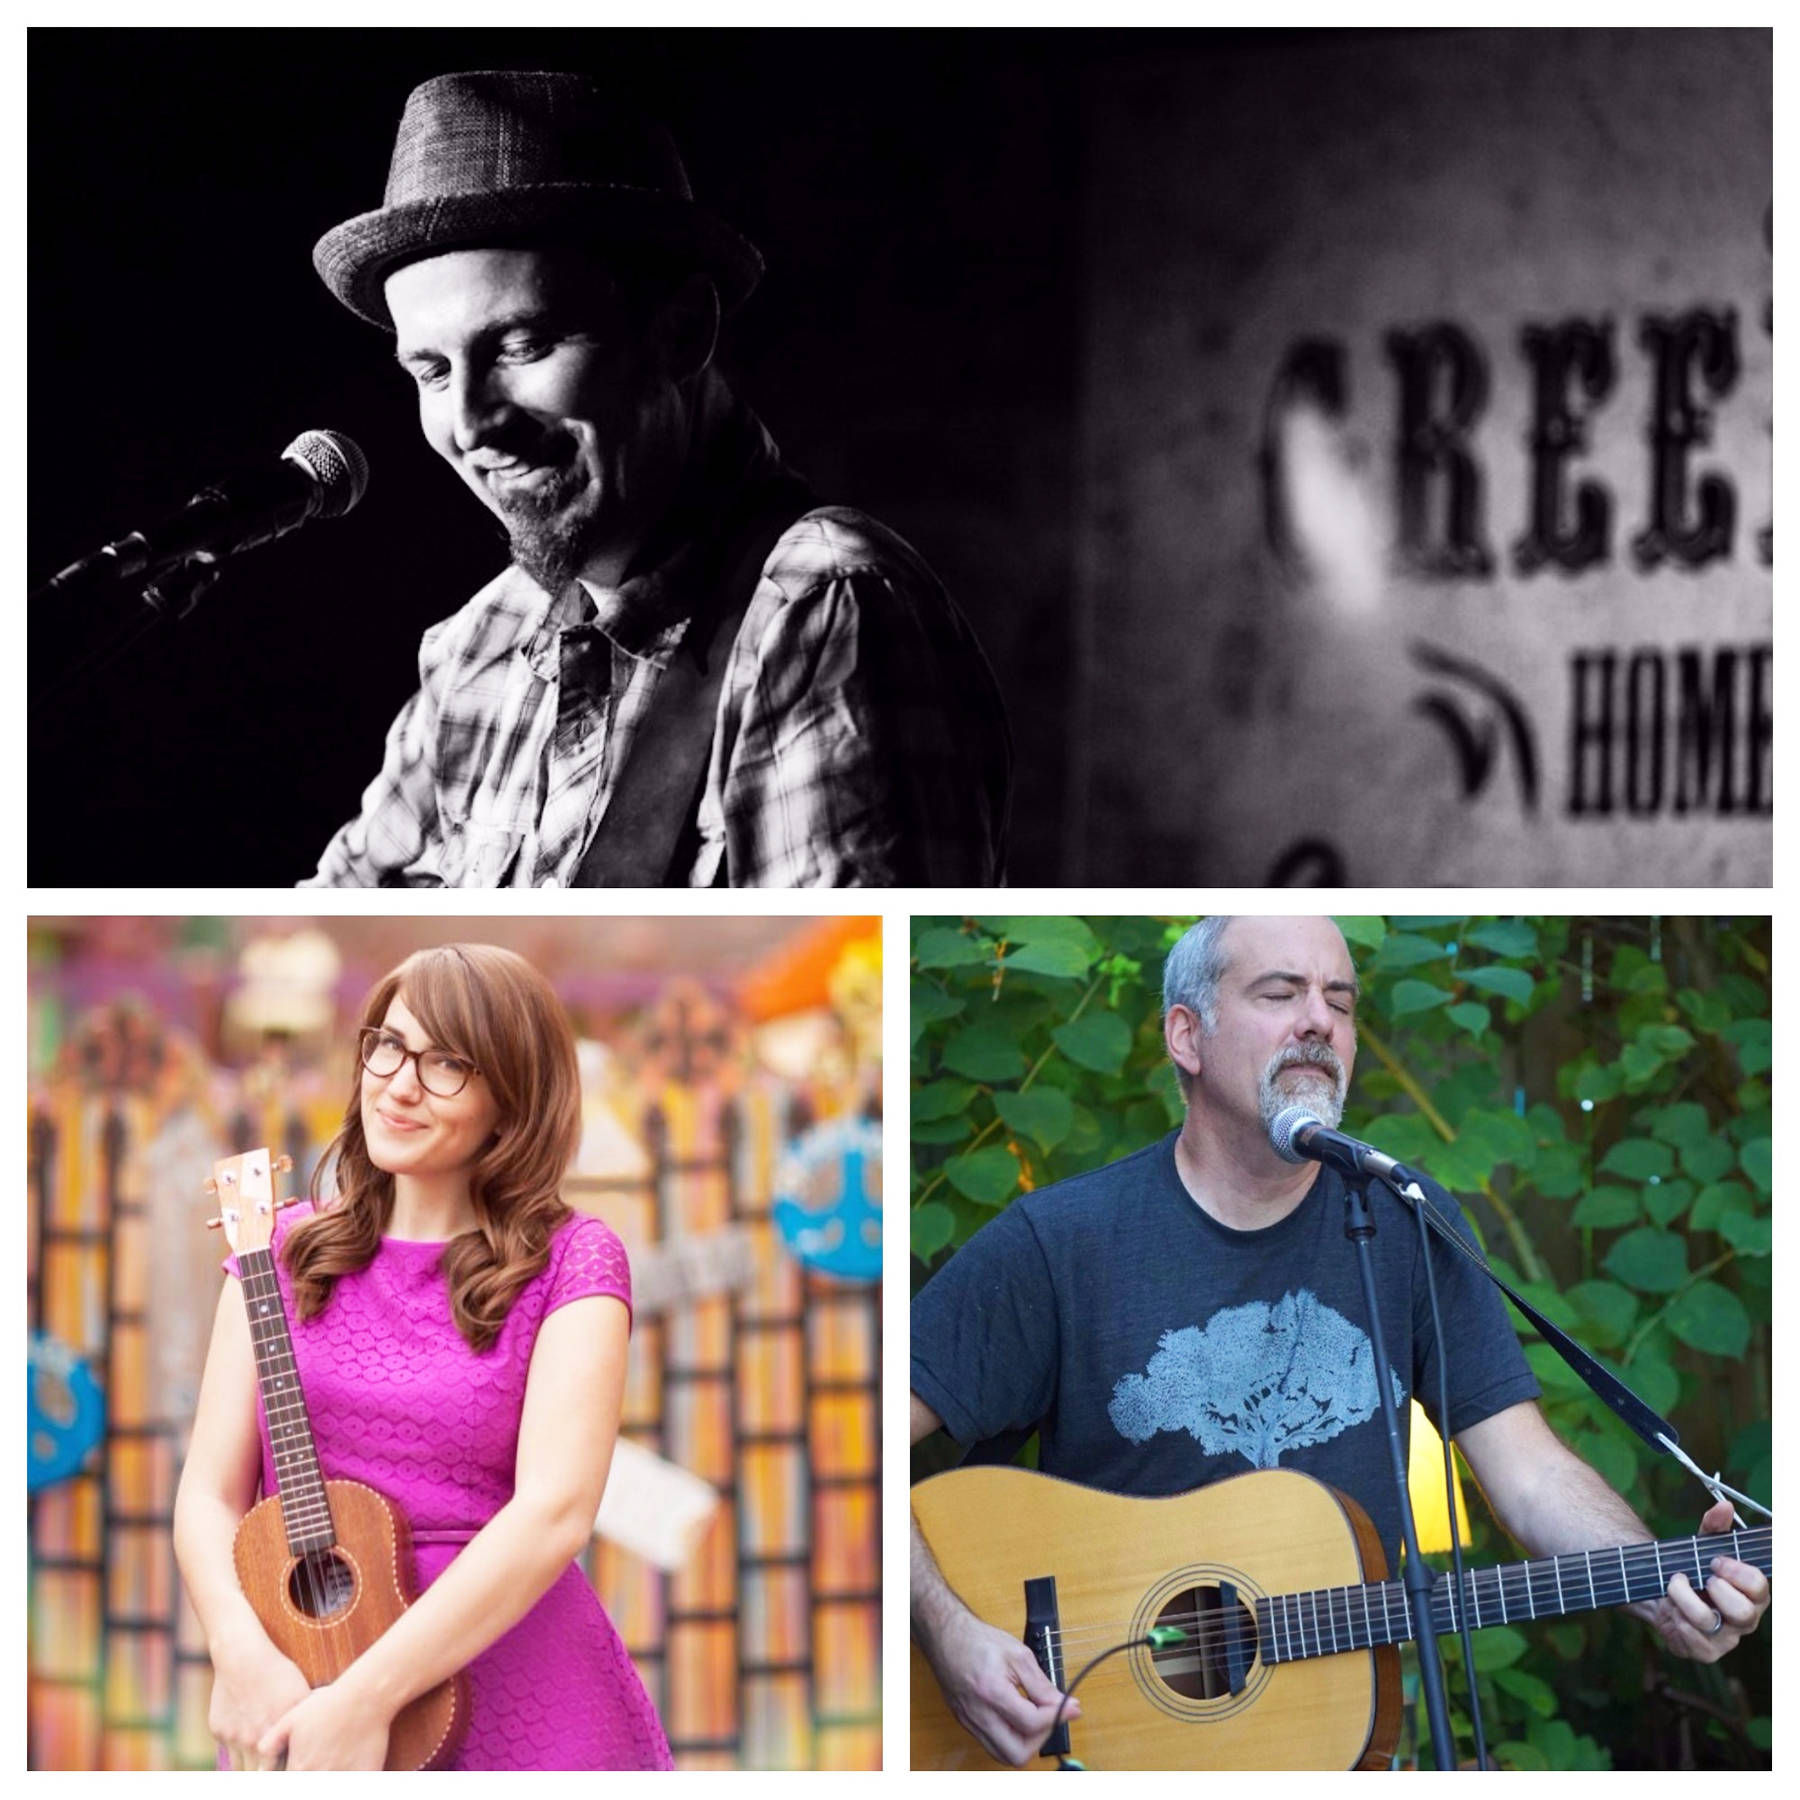 Peter Mulvey (top), Danielle Ate the Sandwich (bottom left) and Joe Panzetta (bottom right) will play a show at the Roasterie Sunday night. (Courtesy Photos)